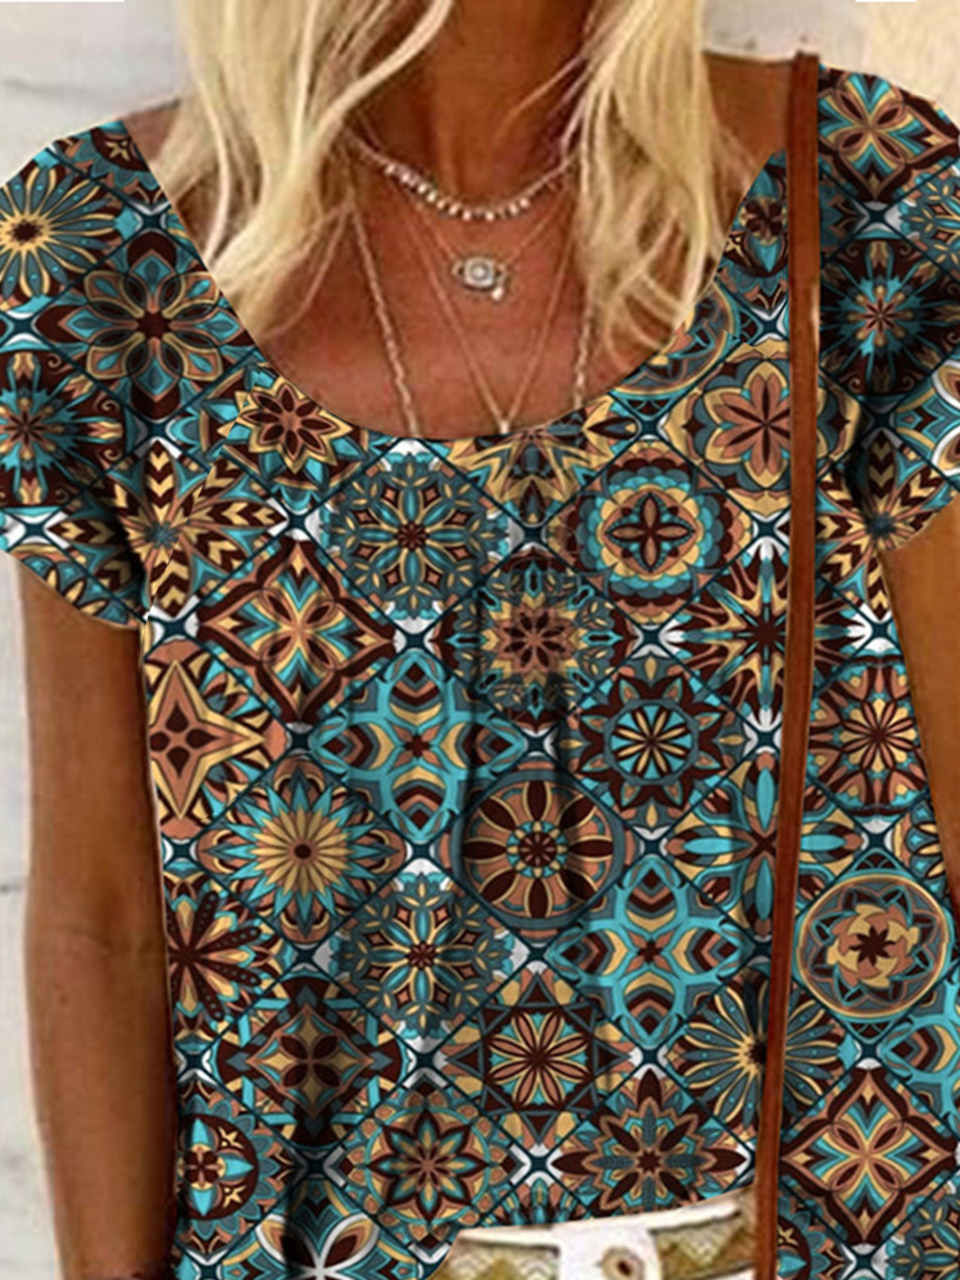 Geometric Vacation T-Shirt for Women Round Neck Tribal Short Sleeve Top